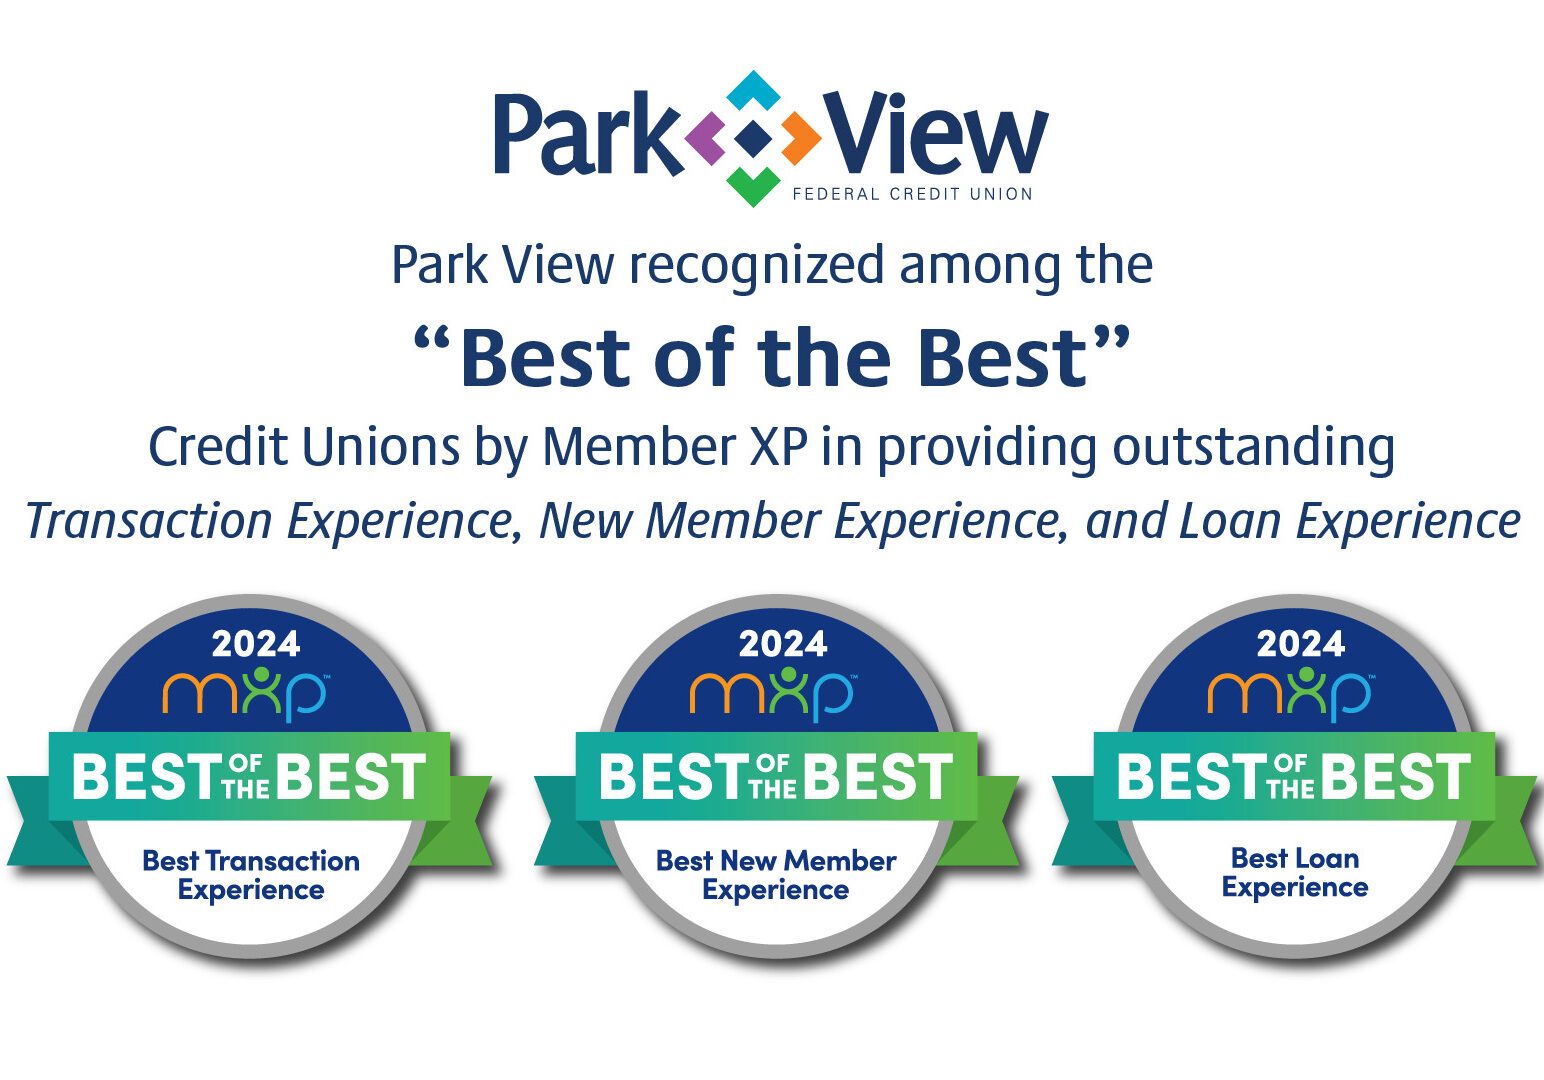 Park View recognized as Best of the Best by Member XP and CU Solutions in providing the best Transaction Experience, New Member Experience, and Loan Experience